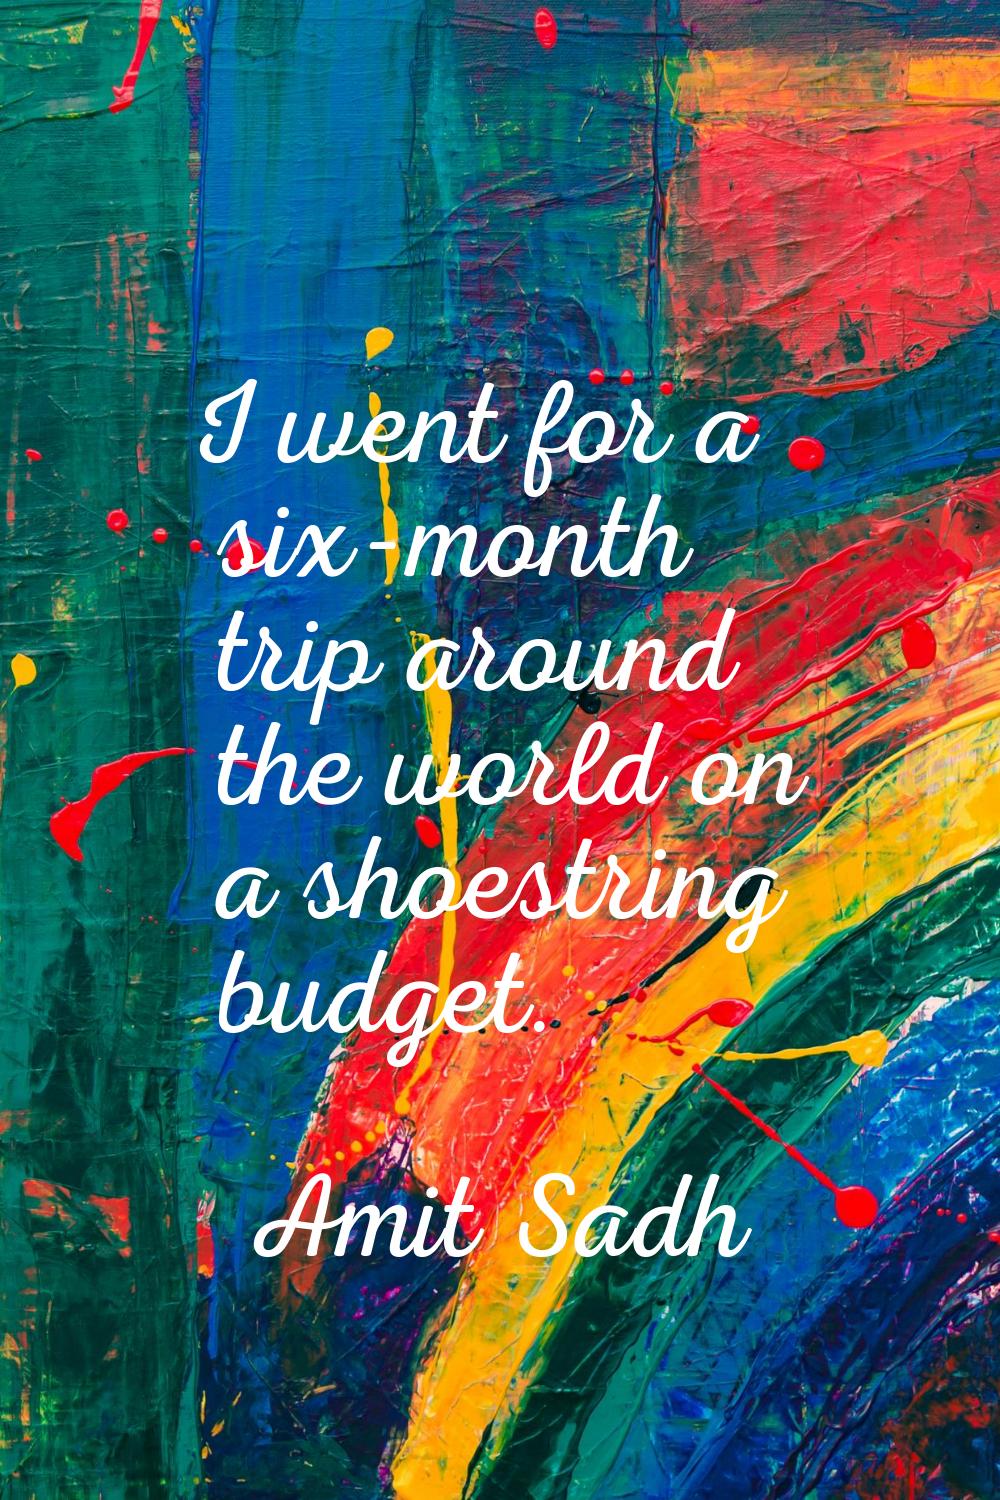 I went for a six-month trip around the world on a shoestring budget.